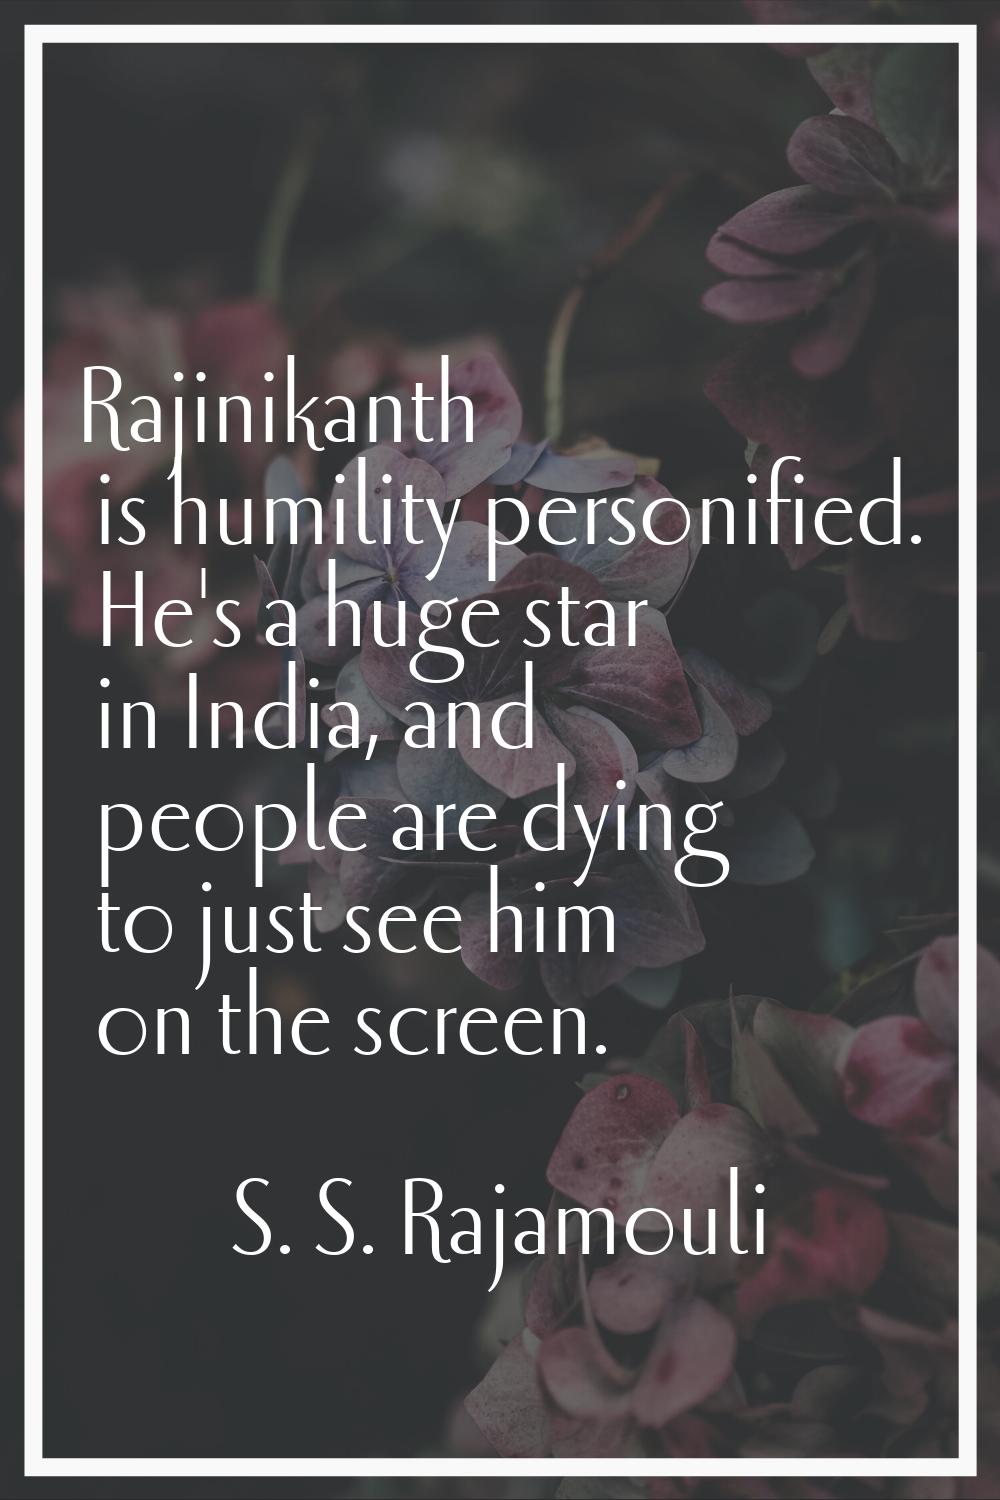 Rajinikanth is humility personified. He's a huge star in India, and people are dying to just see hi